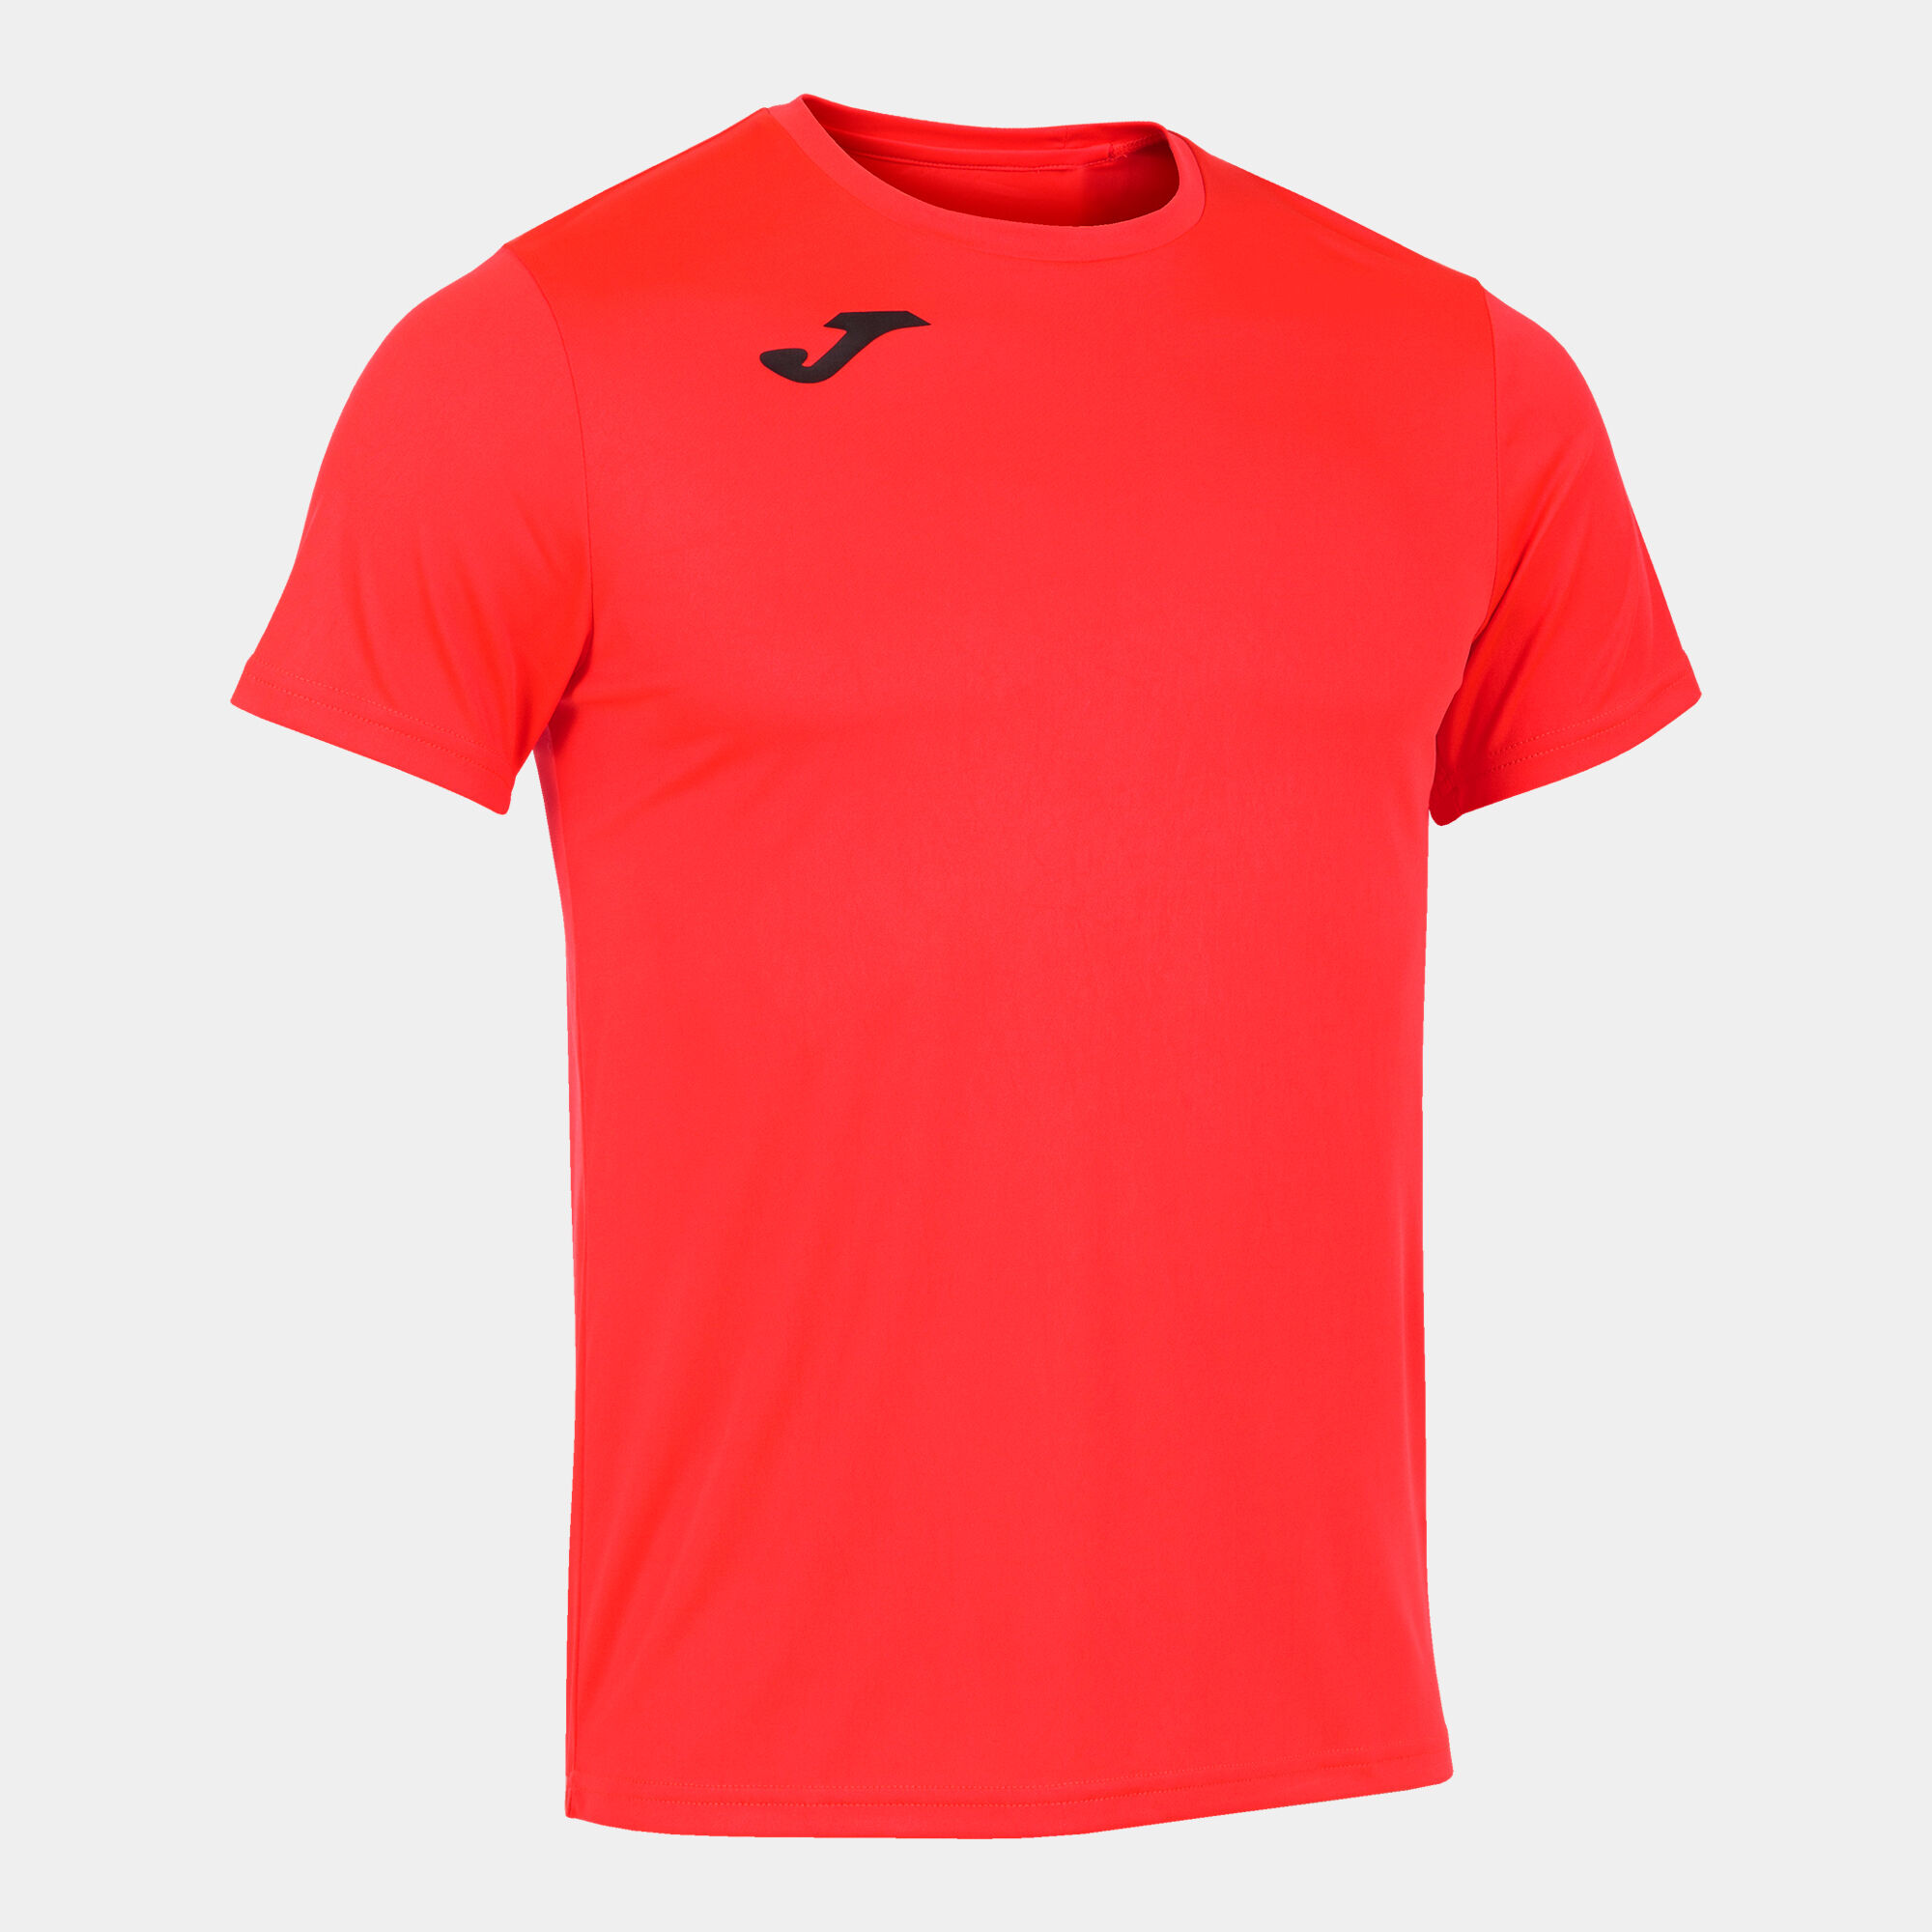 Maillot manches courtes homme Record II corail fluo